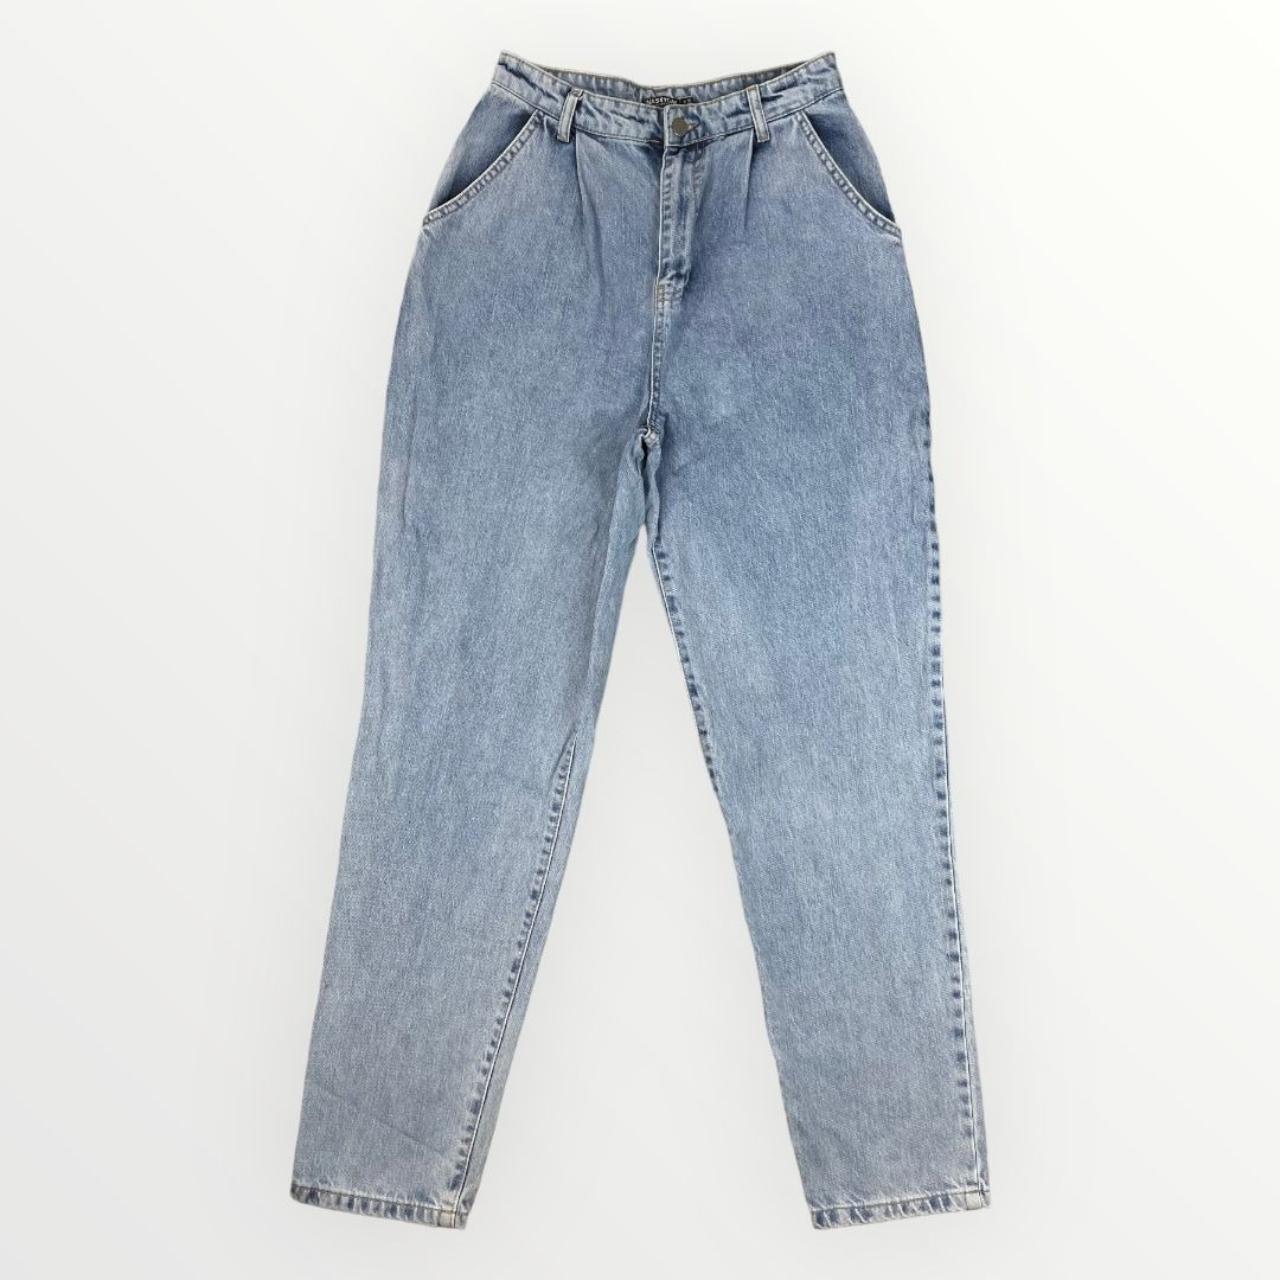 NASTYGAL Collection Women's High Waisted Mom Jeans - Depop